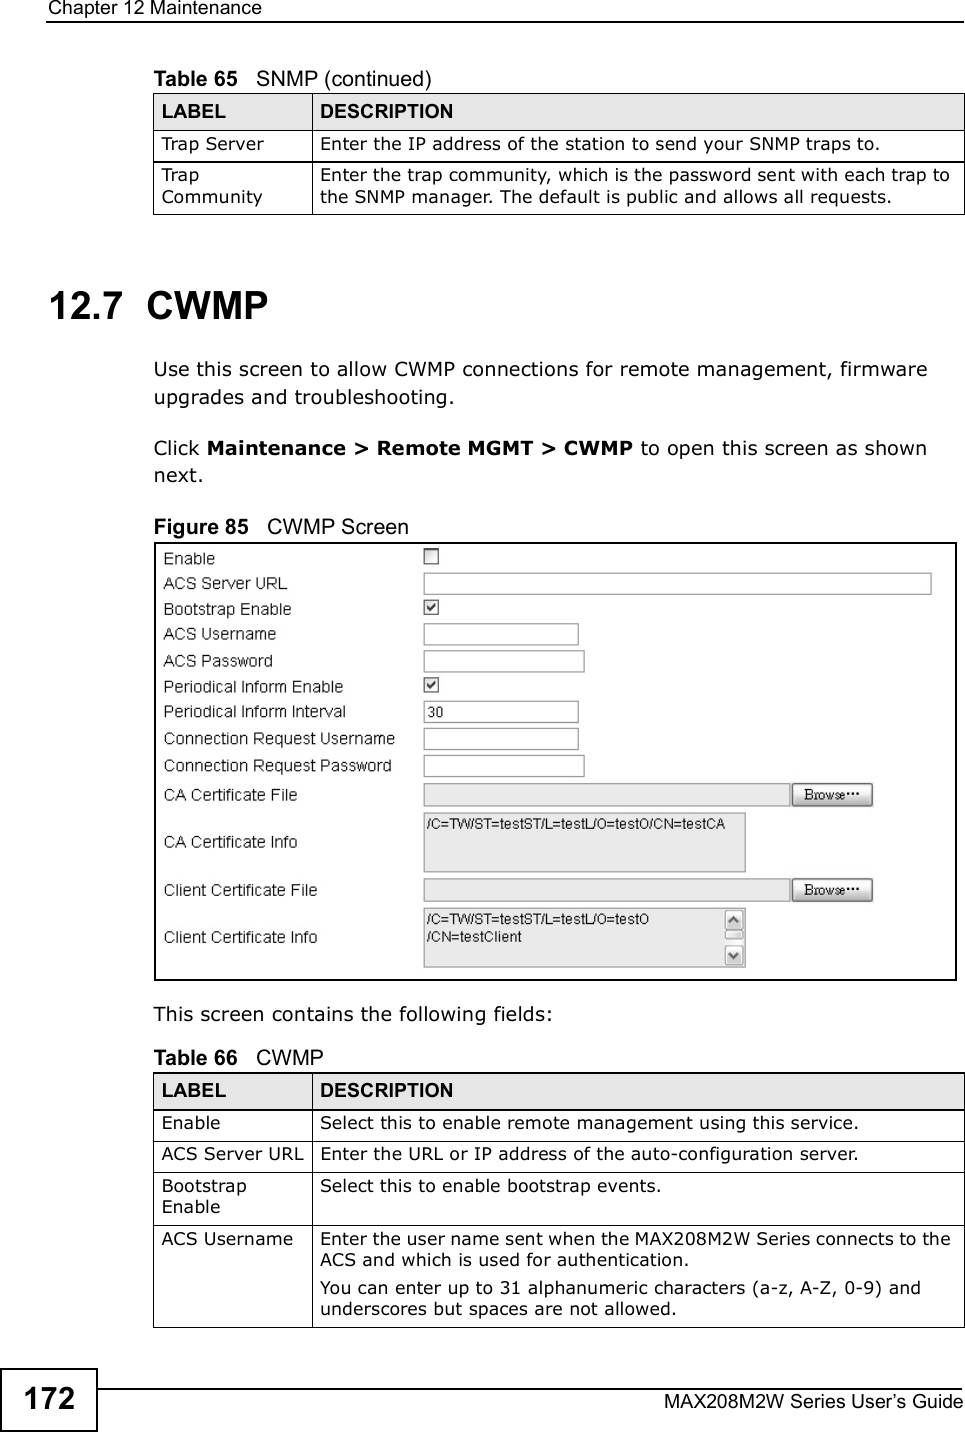 Chapter 12MaintenanceMAX208M2W Series User s Guide17212.7  CWMPUse this screen to allow CWMP connections for remote management, firmware upgrades and troubleshooting.Click Maintenance &gt; Remote MGMT &gt; CWMP to open this screen as shown next.Figure 85   CWMP ScreenThis screen contains the following fields:Trap Server Enter the IP address of the station to send your SNMP traps to.Trap CommunityEnter the trap community, which is the password sent with each trap to the SNMP manager. The default is public and allows all requests.Table 65   SNMP (continued)LABEL DESCRIPTIONTable 66   CWMPLABEL DESCRIPTIONEnableSelect this to enable remote management using this service.ACS Server URLEnter the URL or IP address of the auto-configuration server.Bootstrap EnableSelect this to enable bootstrap events.ACS Username Enter the user name sent when the MAX208M2W Series connects to the ACS and which is used for authentication.You can enter up to 31 alphanumeric characters (a-z, A-Z, 0-9) and underscores but spaces are not allowed.